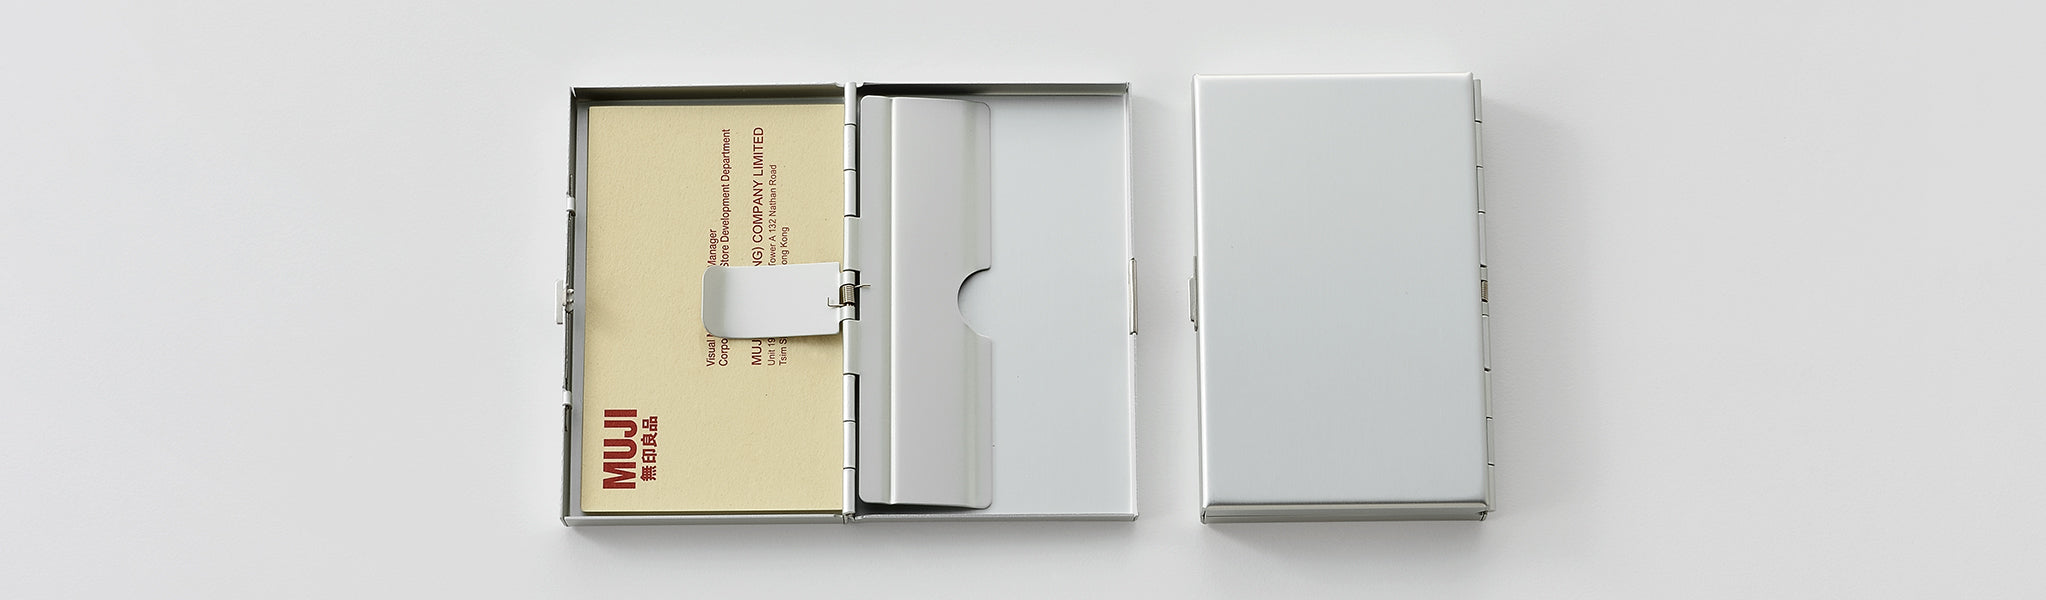 An open aluminum card holder next to a closed one